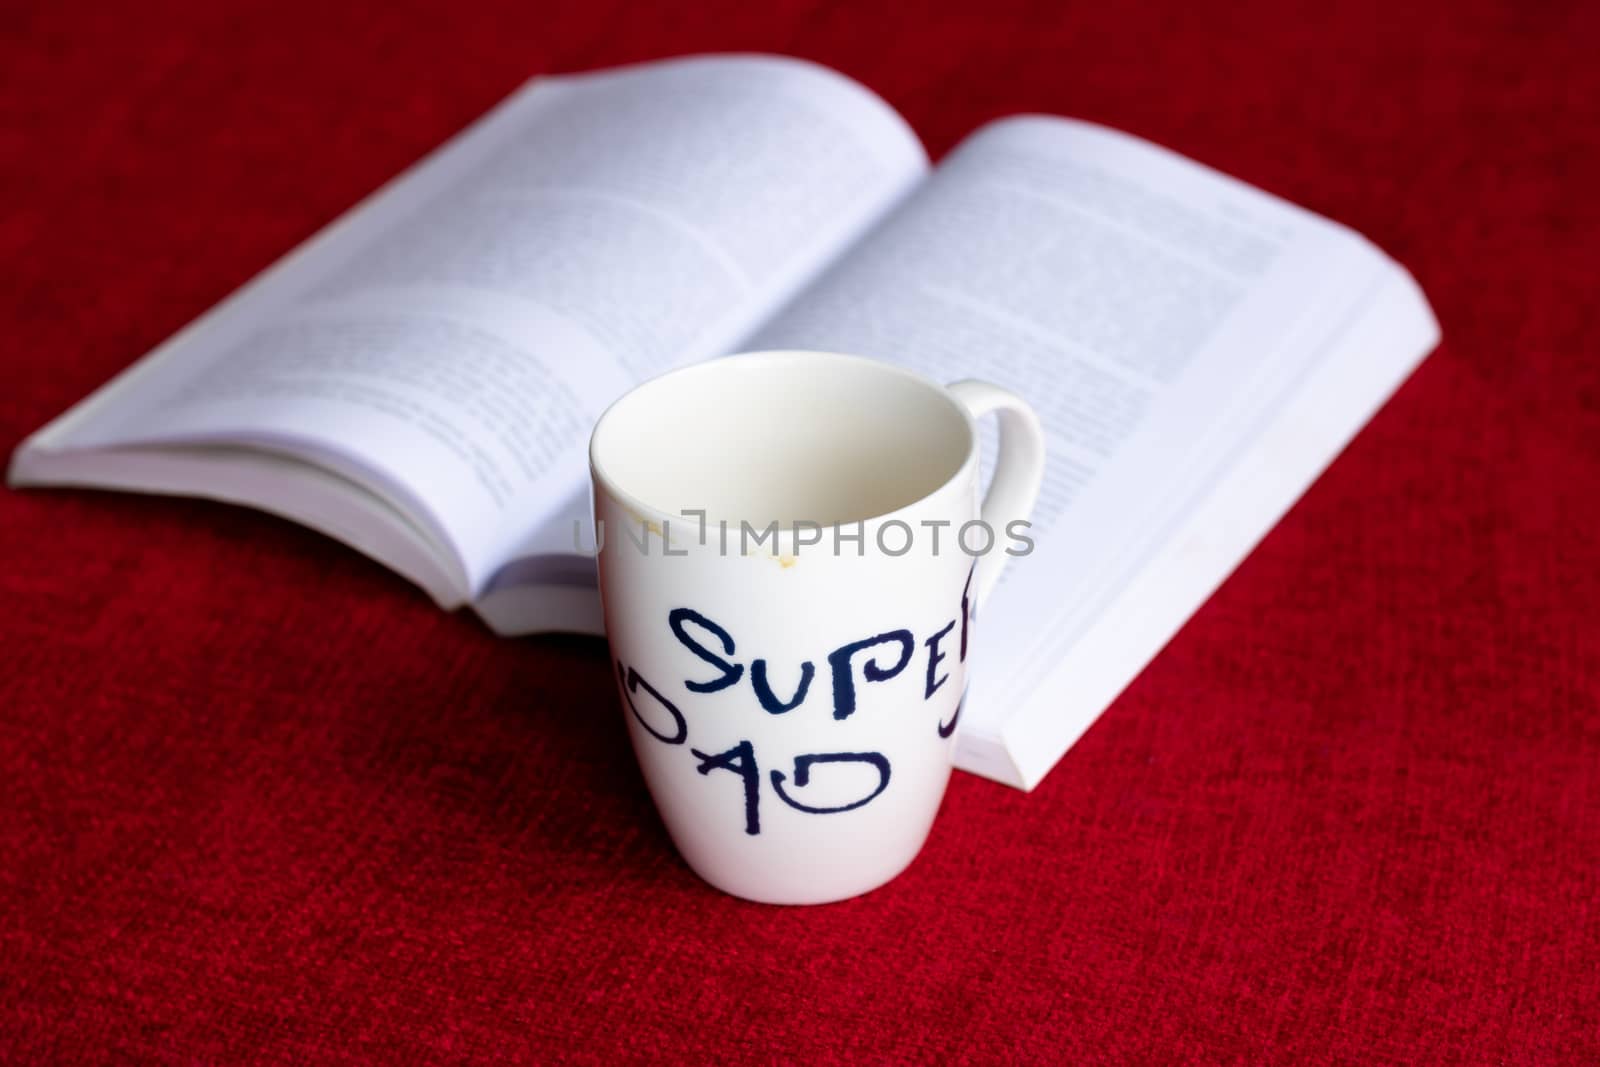 Stained coffee mug with an open book on a red sofa/couch